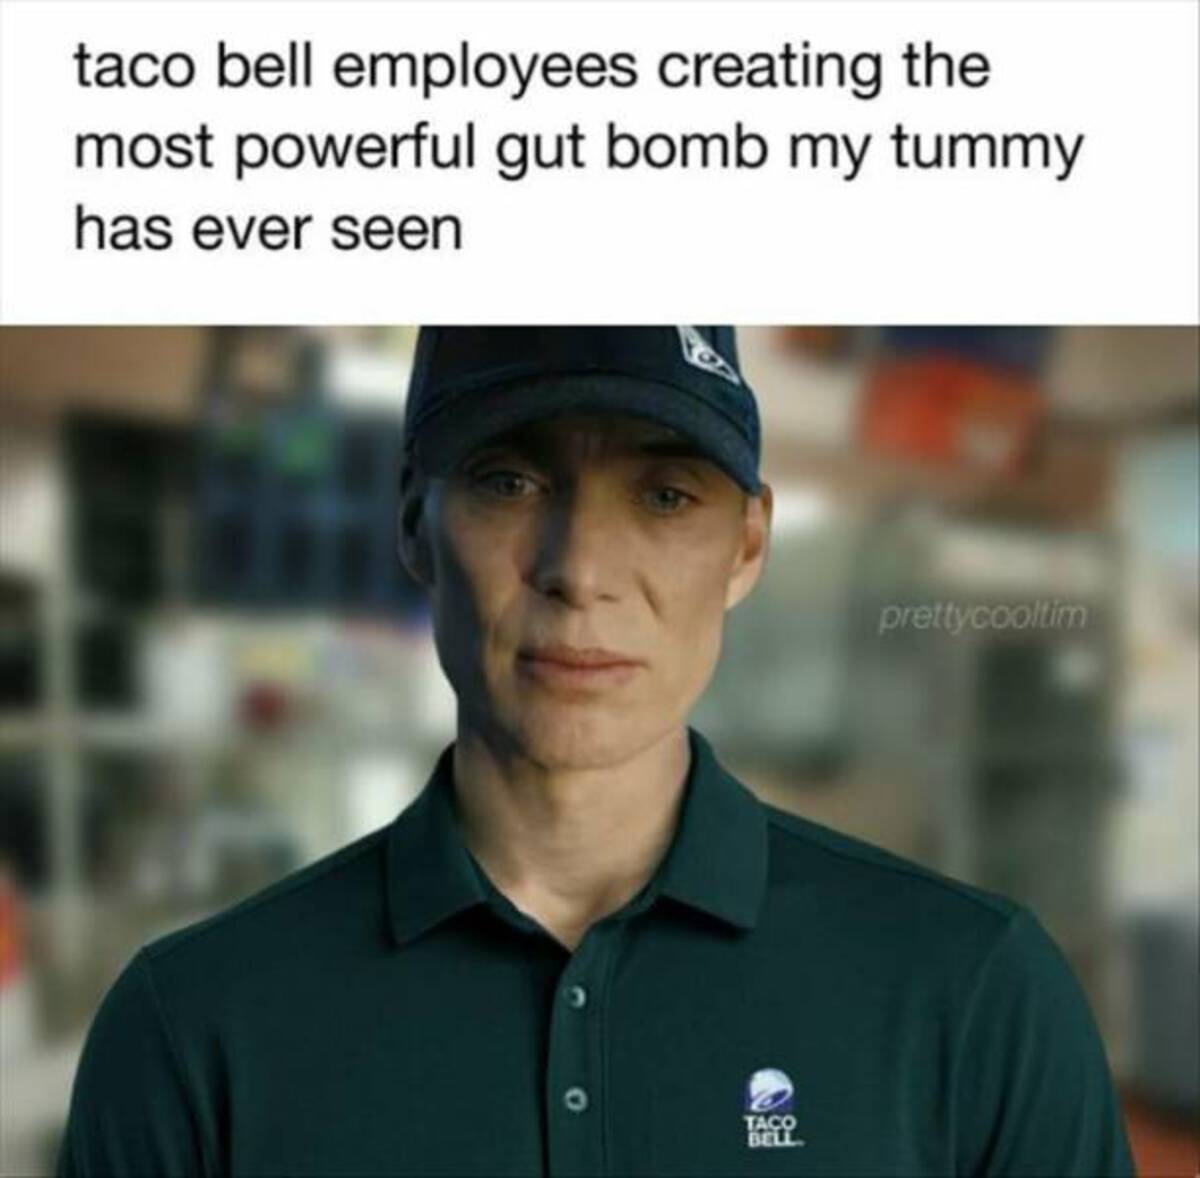 oppenheimer taco bell meme - taco bell employees creating the most powerful gut bomb my tummy has ever seen Taco Bell prettycooltim